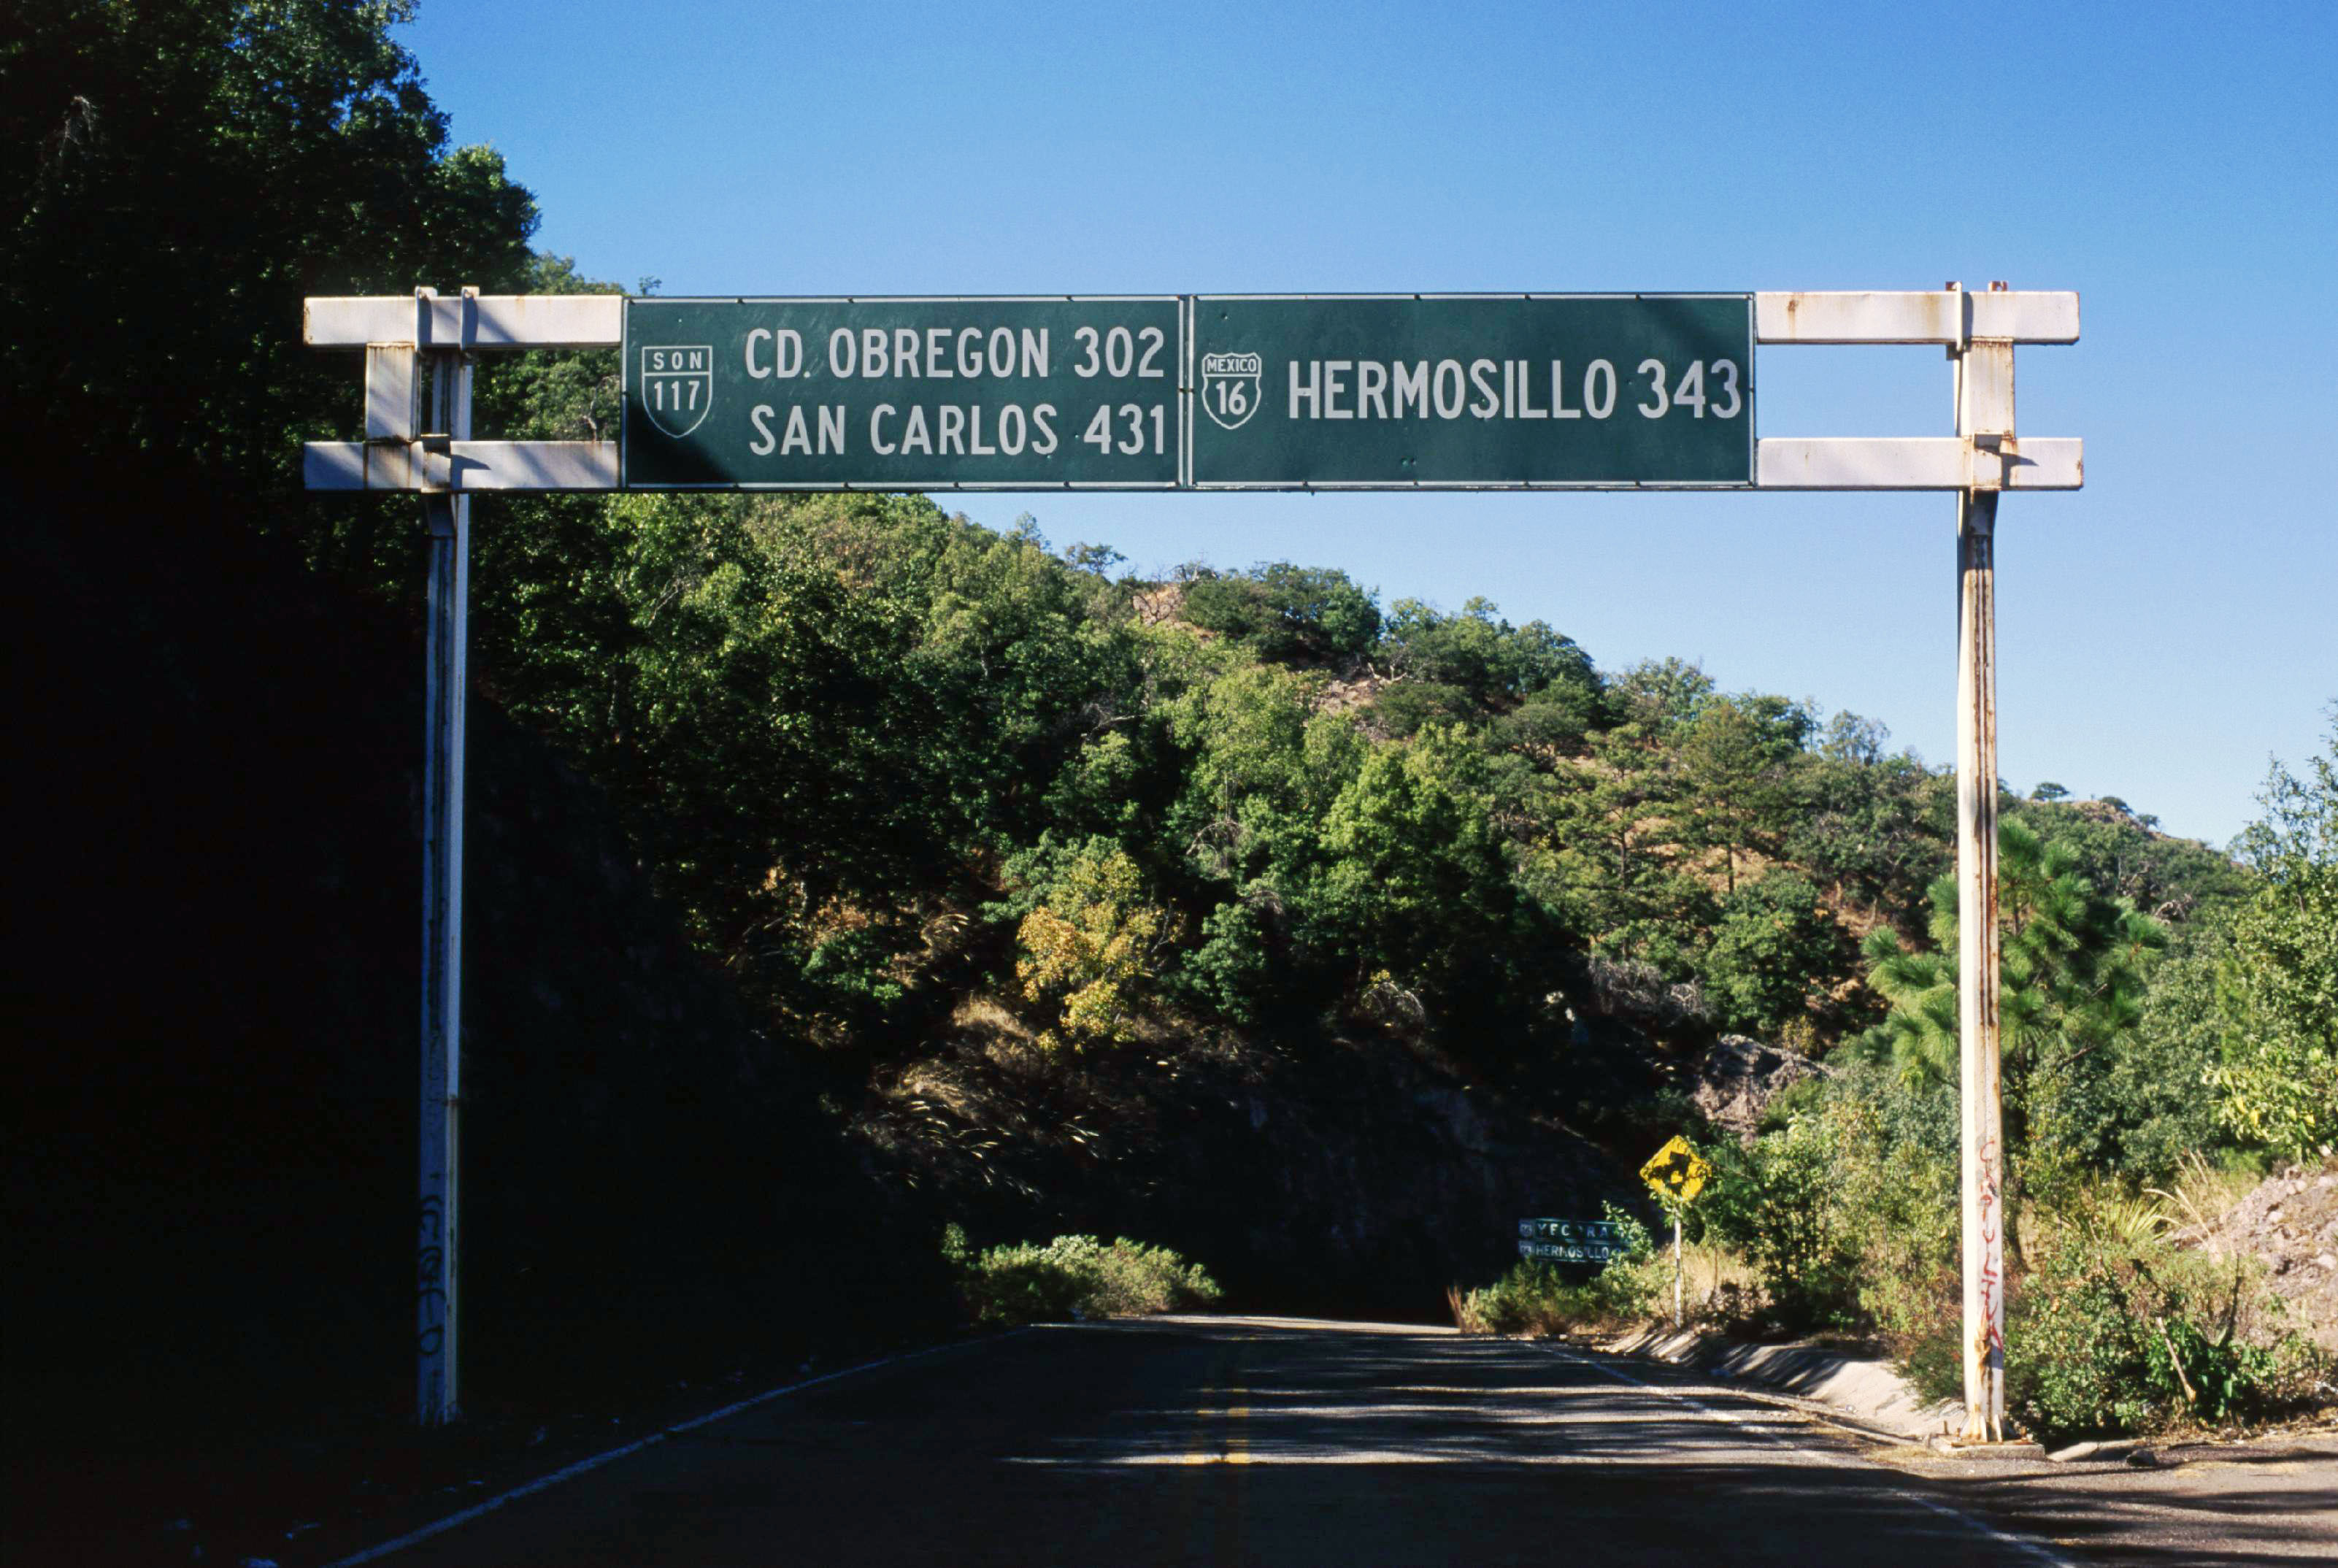 Mexico - Sonora state highway 117 and federal highway 16 sign.